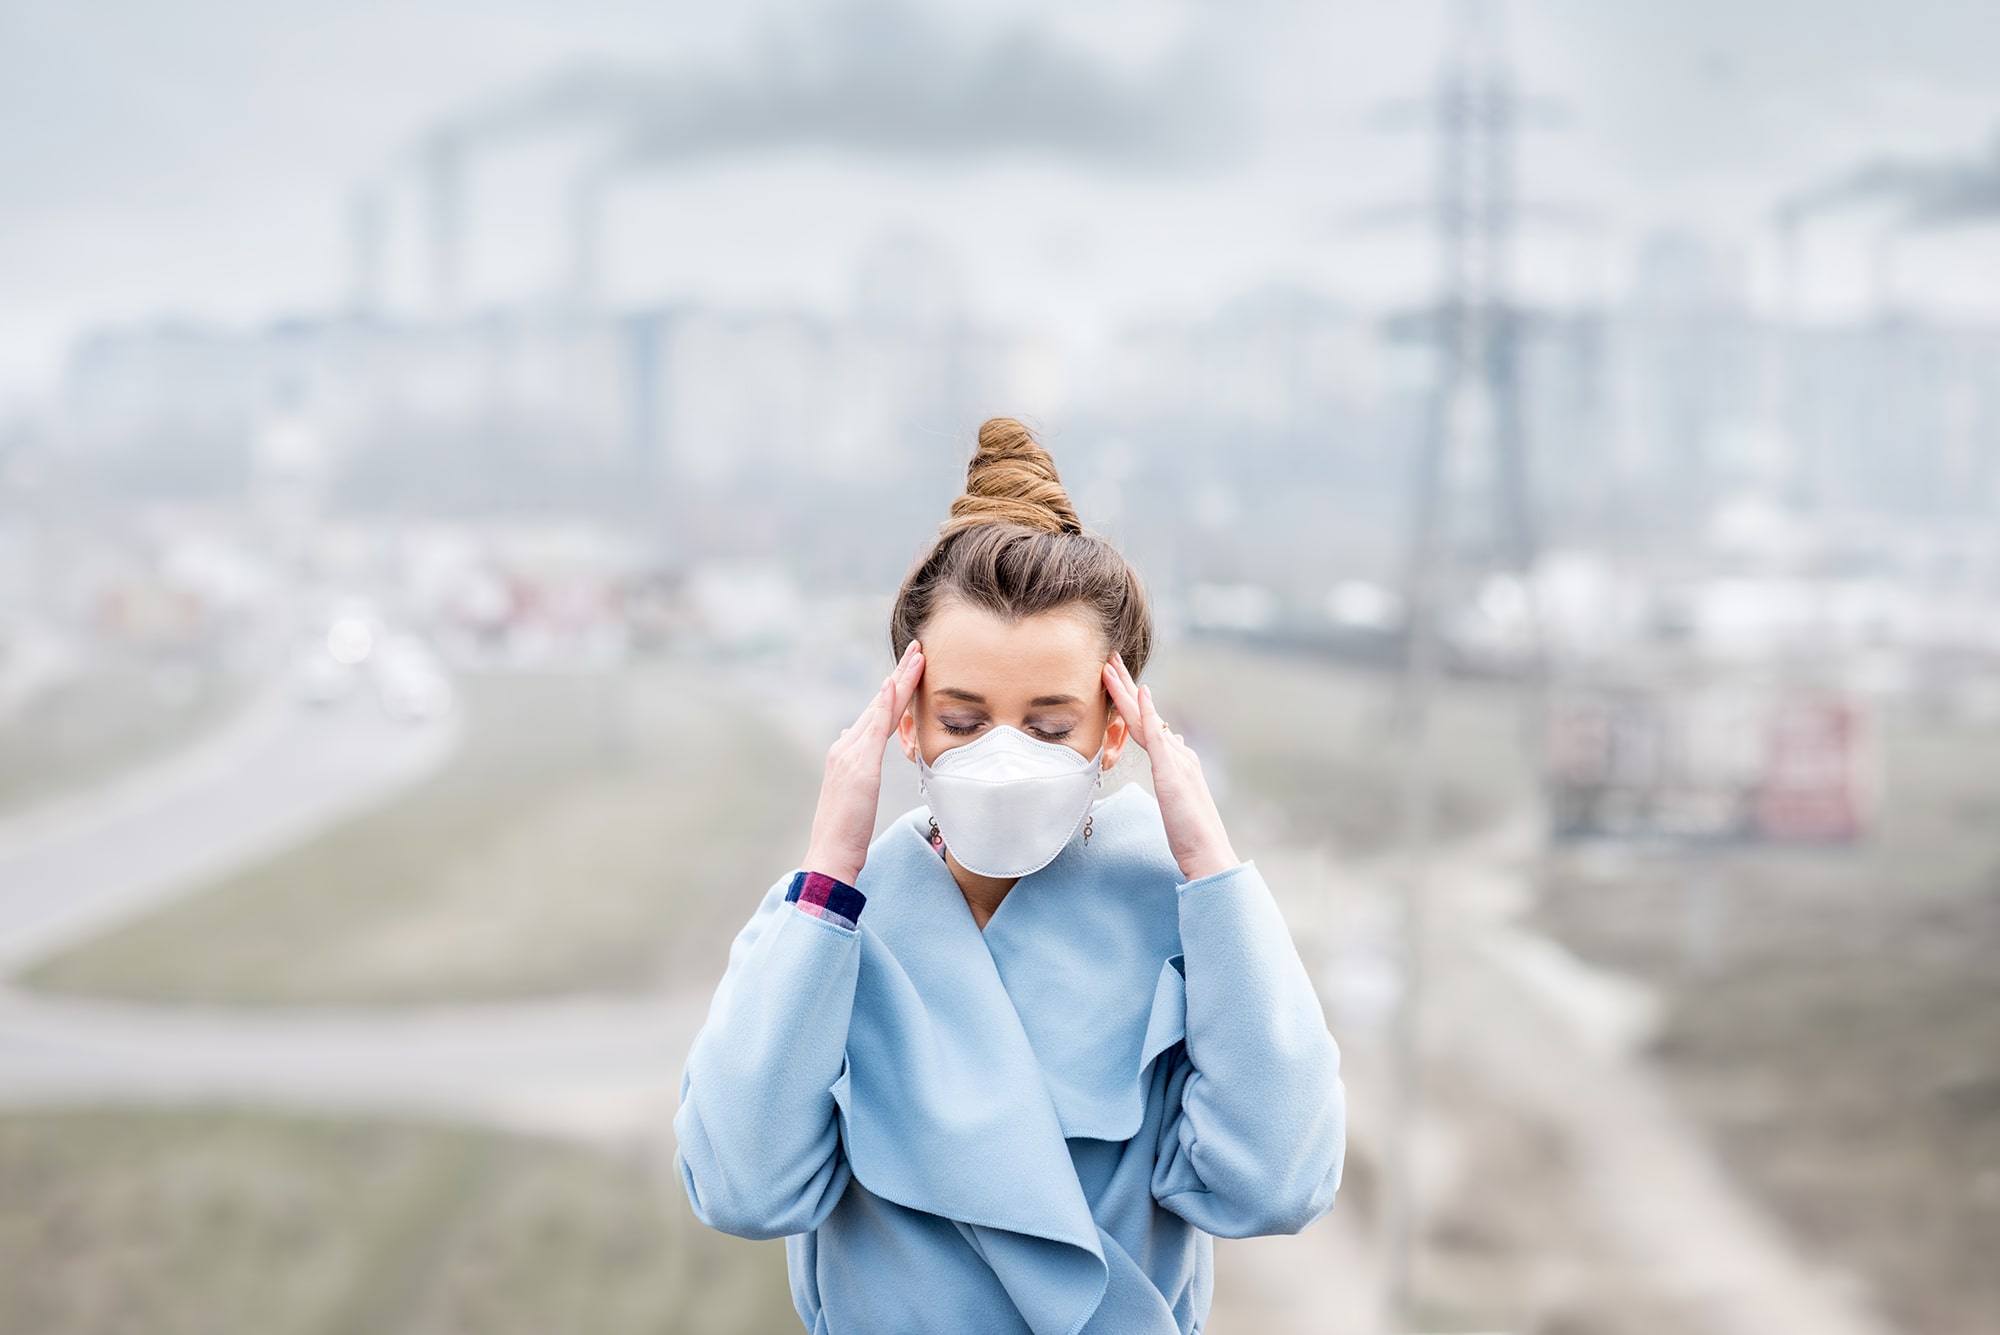 the bmj: Doctors have a role in tackling air pollution: here’s how some are rising to the challenge